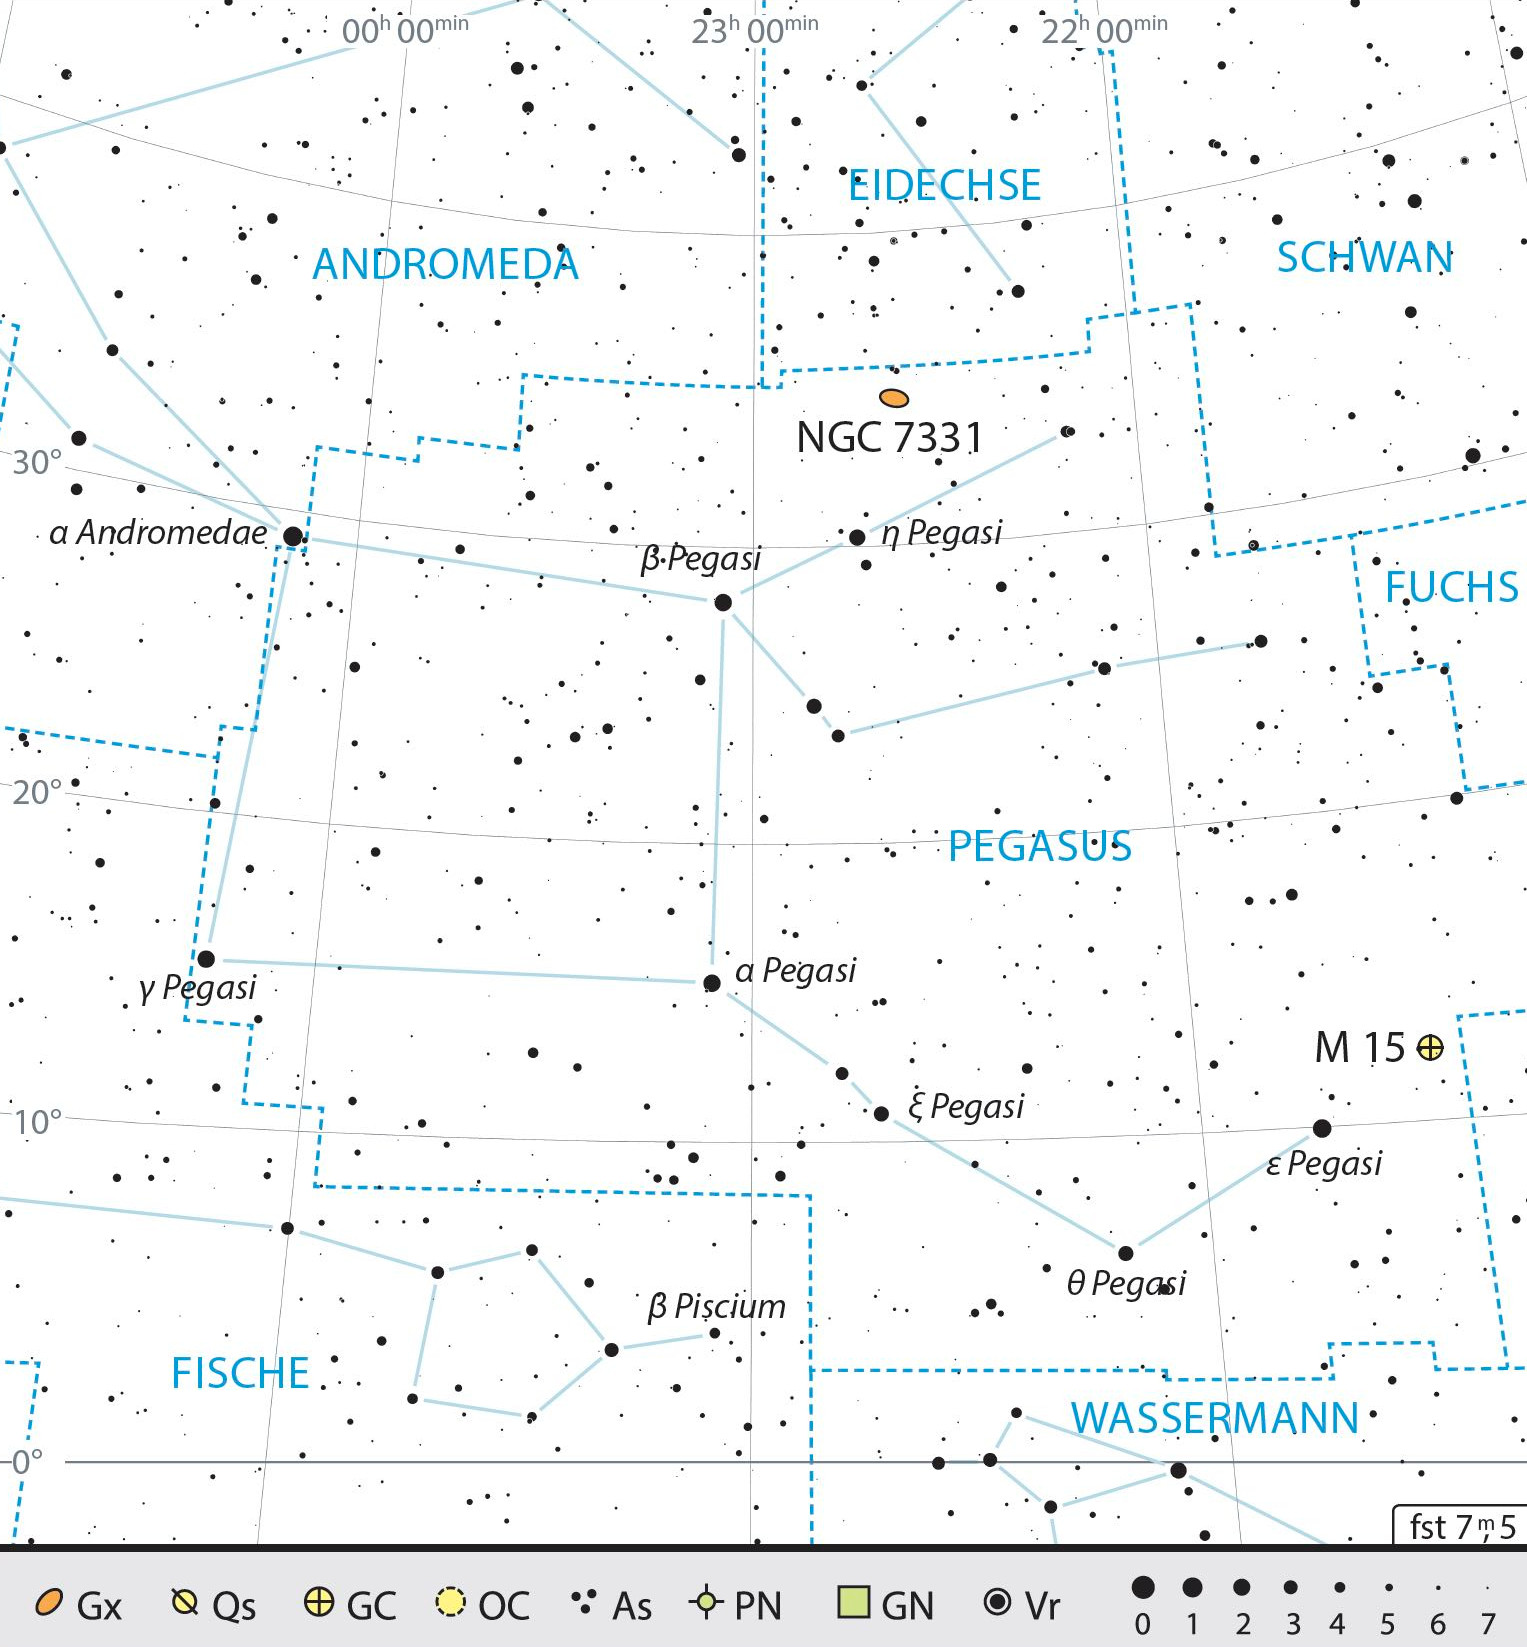 Outline map of the constellation of Pegasus with our observing recommendations. J. Scholten